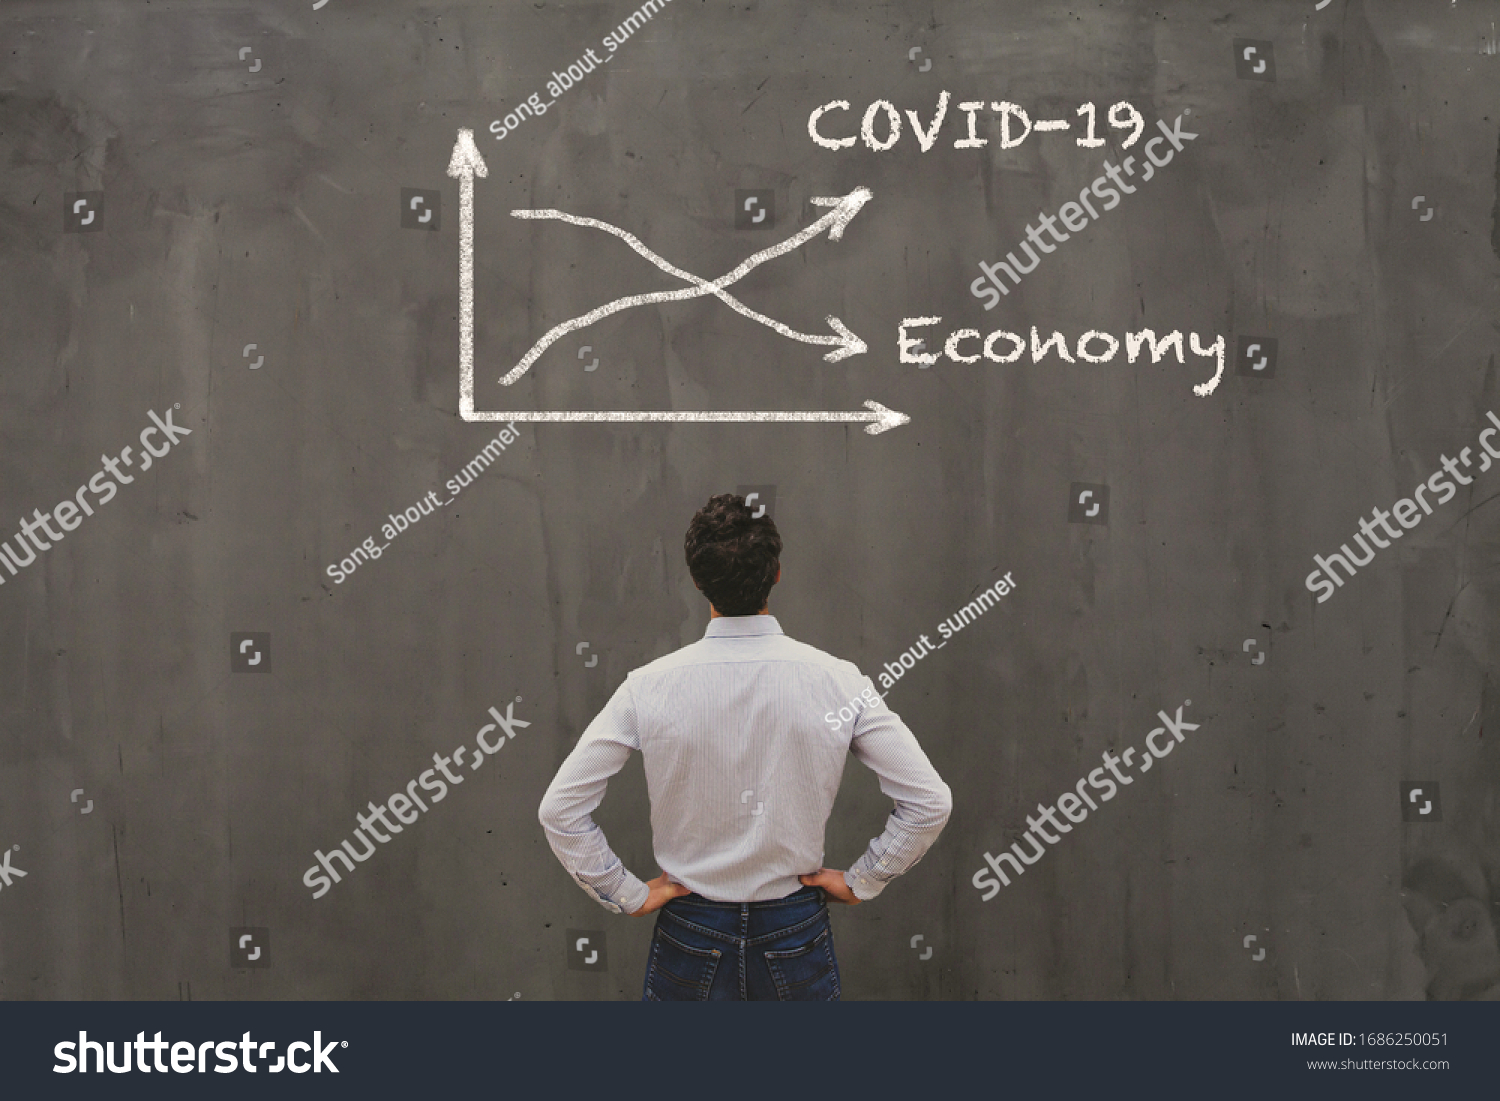 econimical crisis concept due to coronavirus COVID-19 spread in the world, virus curve up, economy down